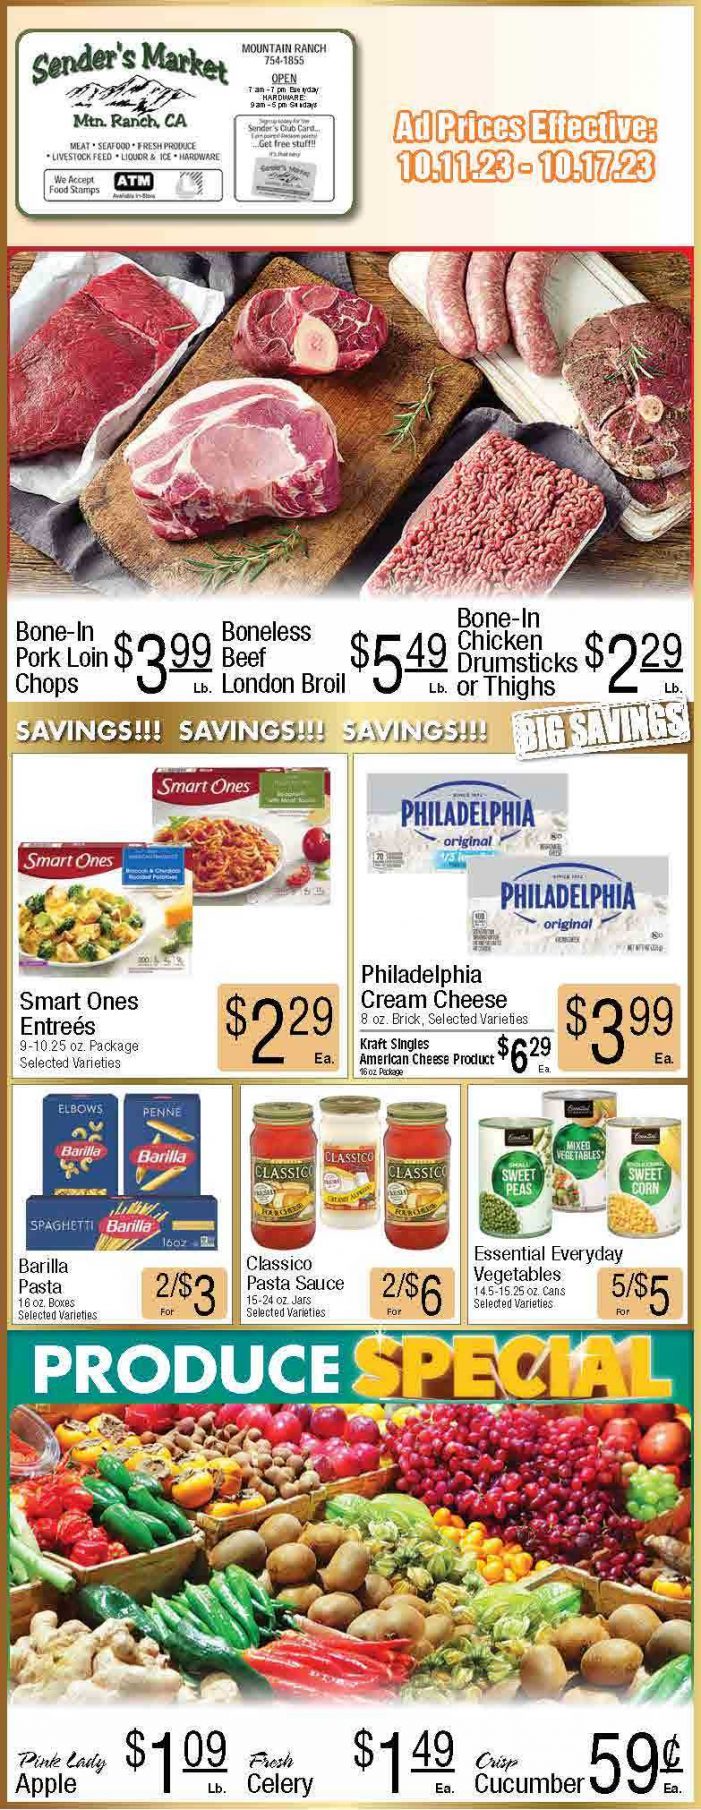 Sender’s Market Weekly Ad & Grocery Specials Through October 17! Shop Local & Save!!